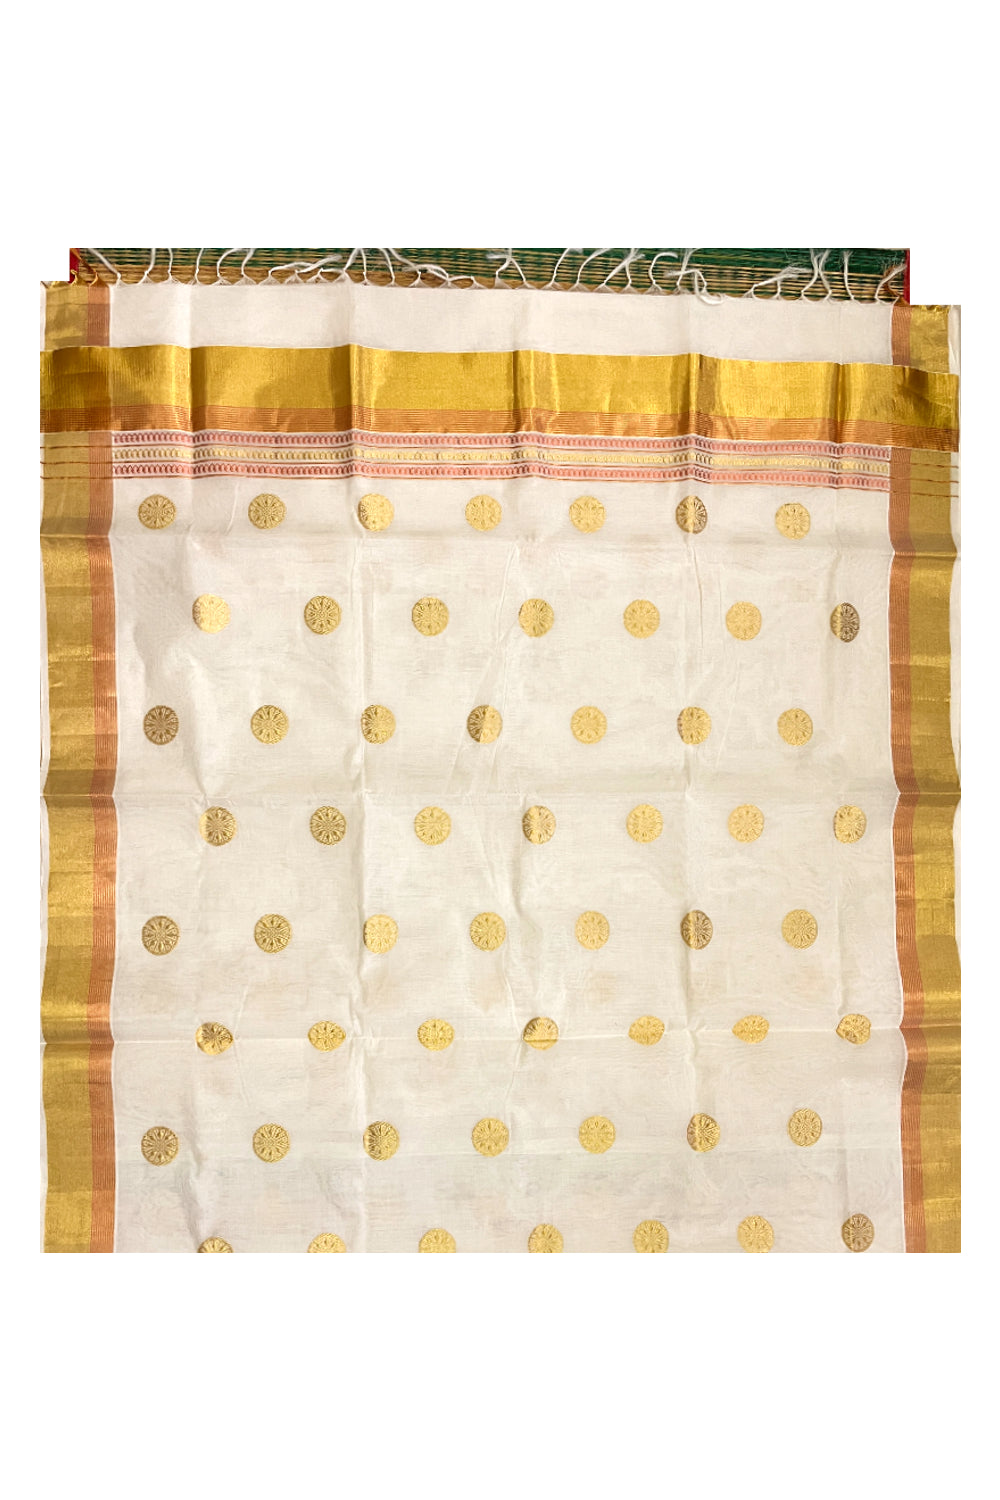 Southloom Premium Handloom Cotton Golden and Copper Kasavu Saree with Woven Designs on Body